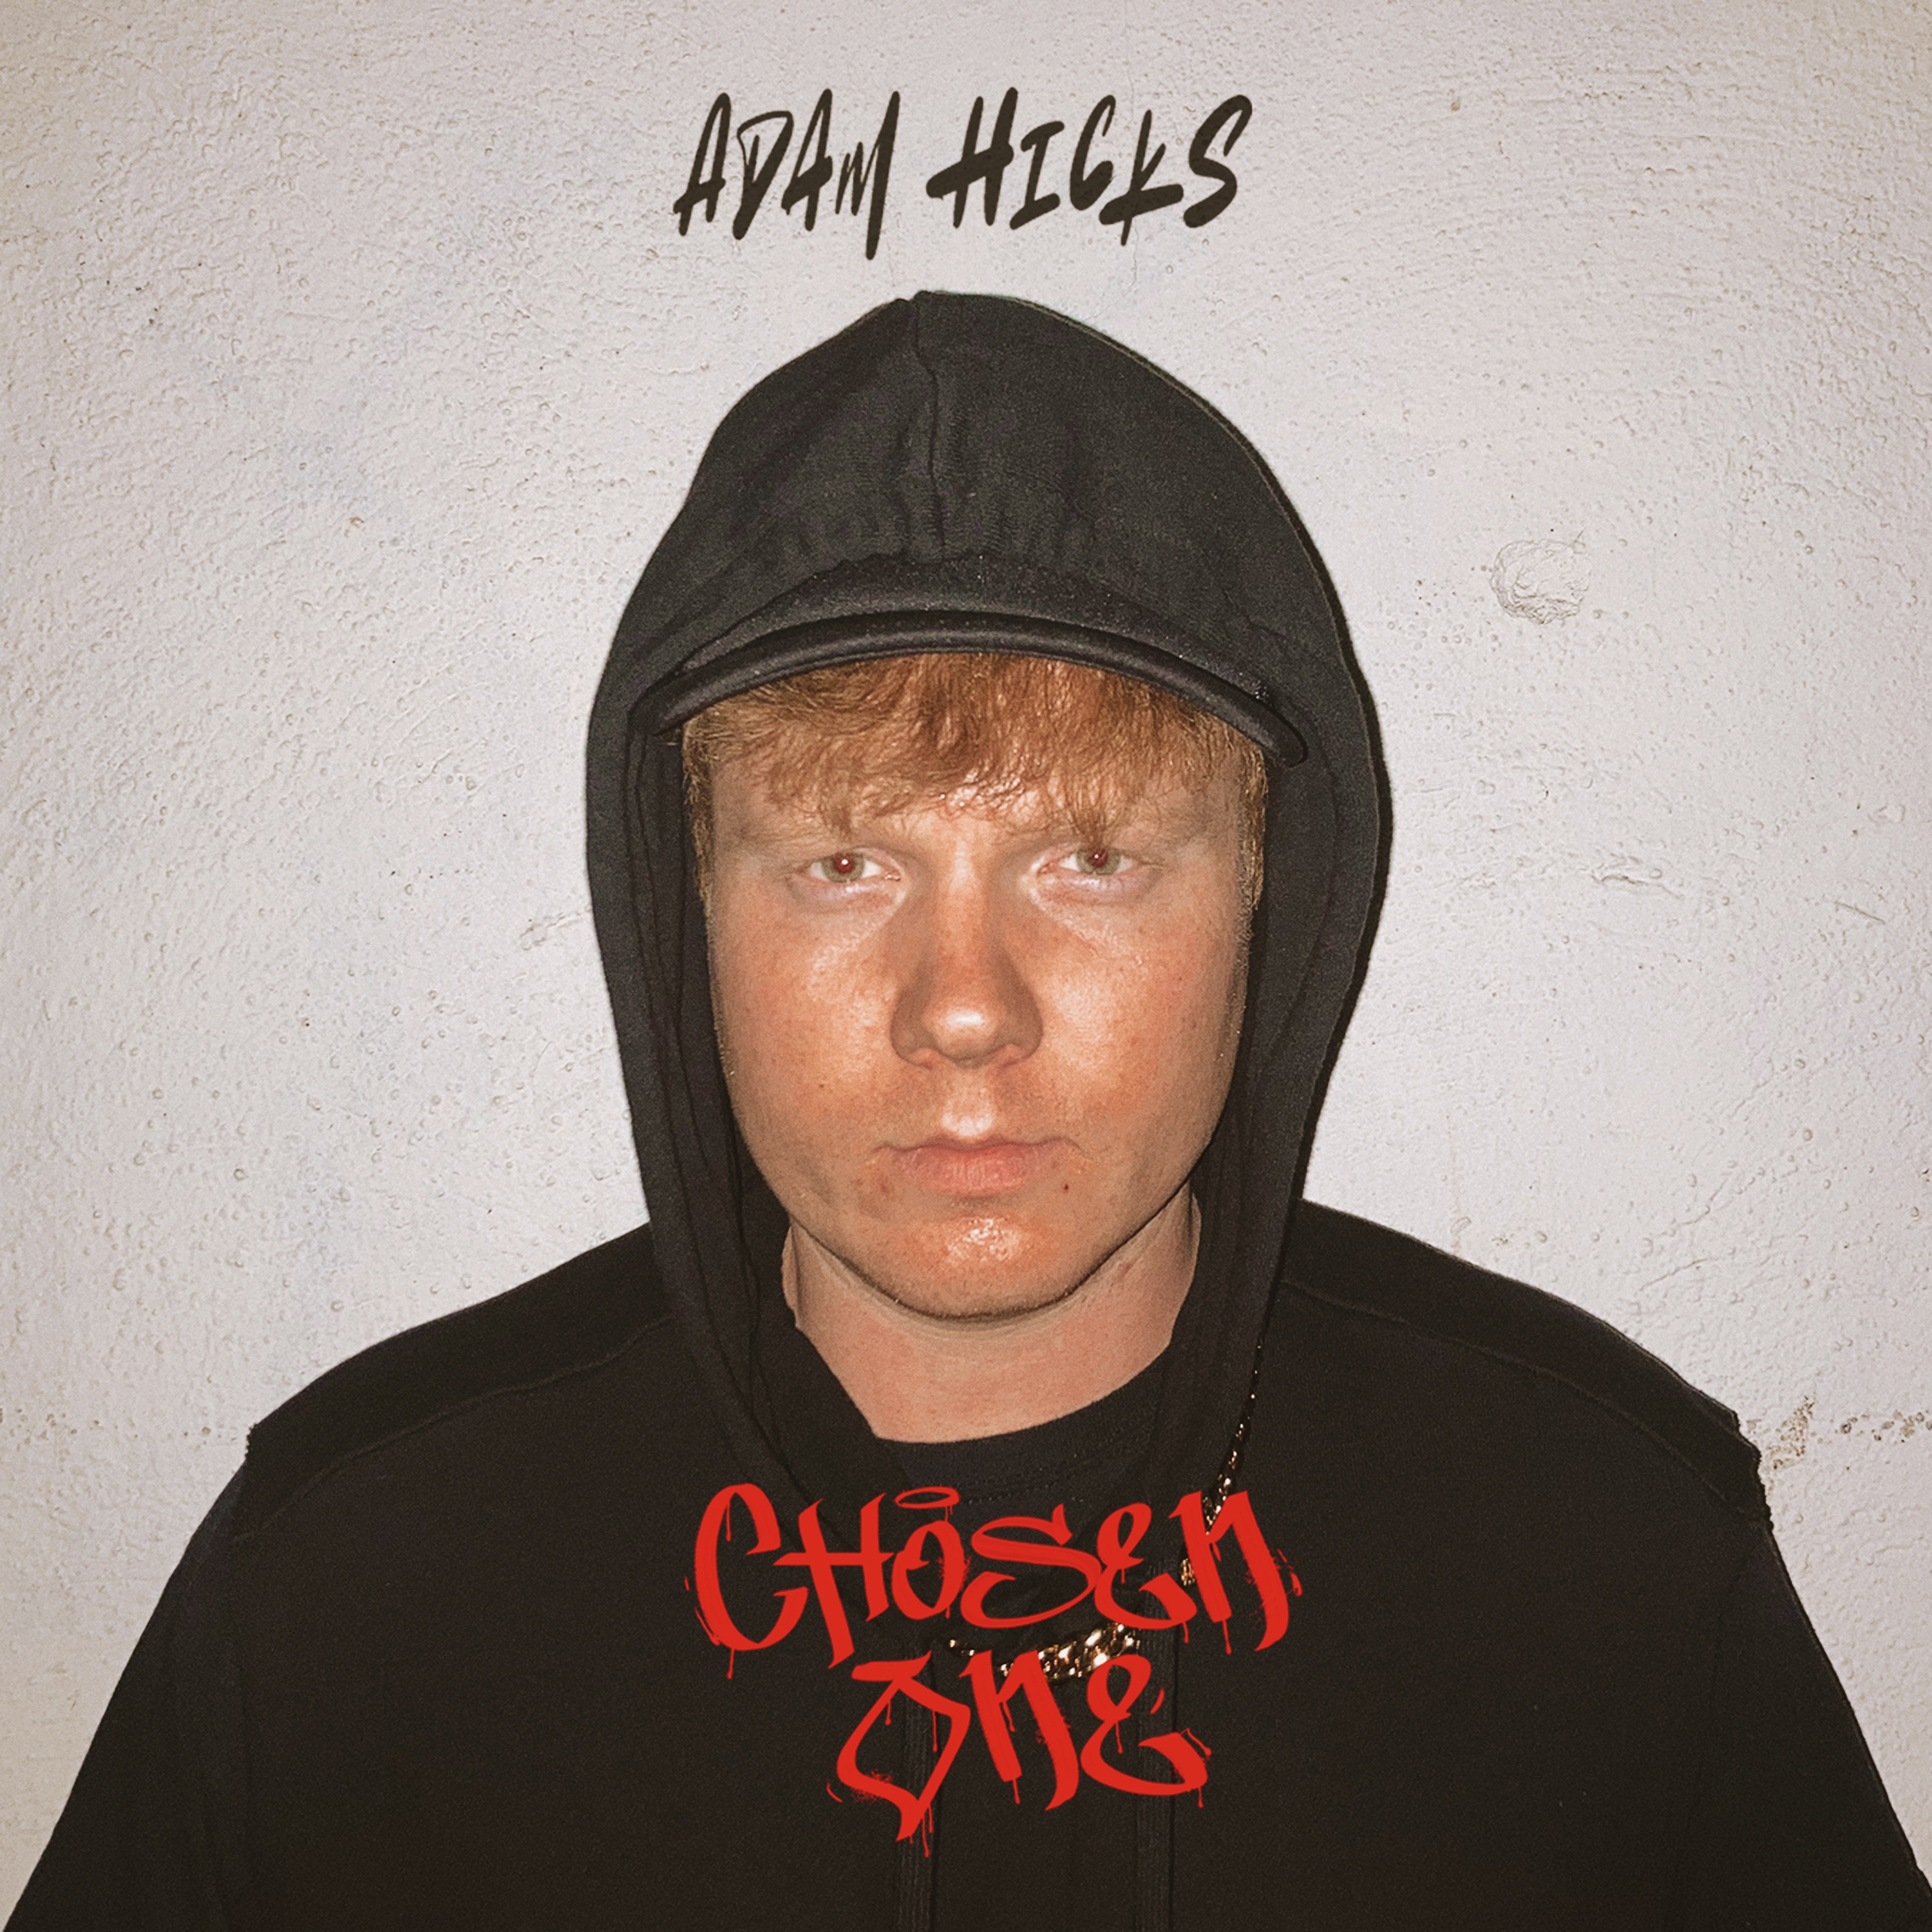 New Music Spotlight: Actor And Rapper Adam Hicks Releases Debut Single ‘Chosen One’